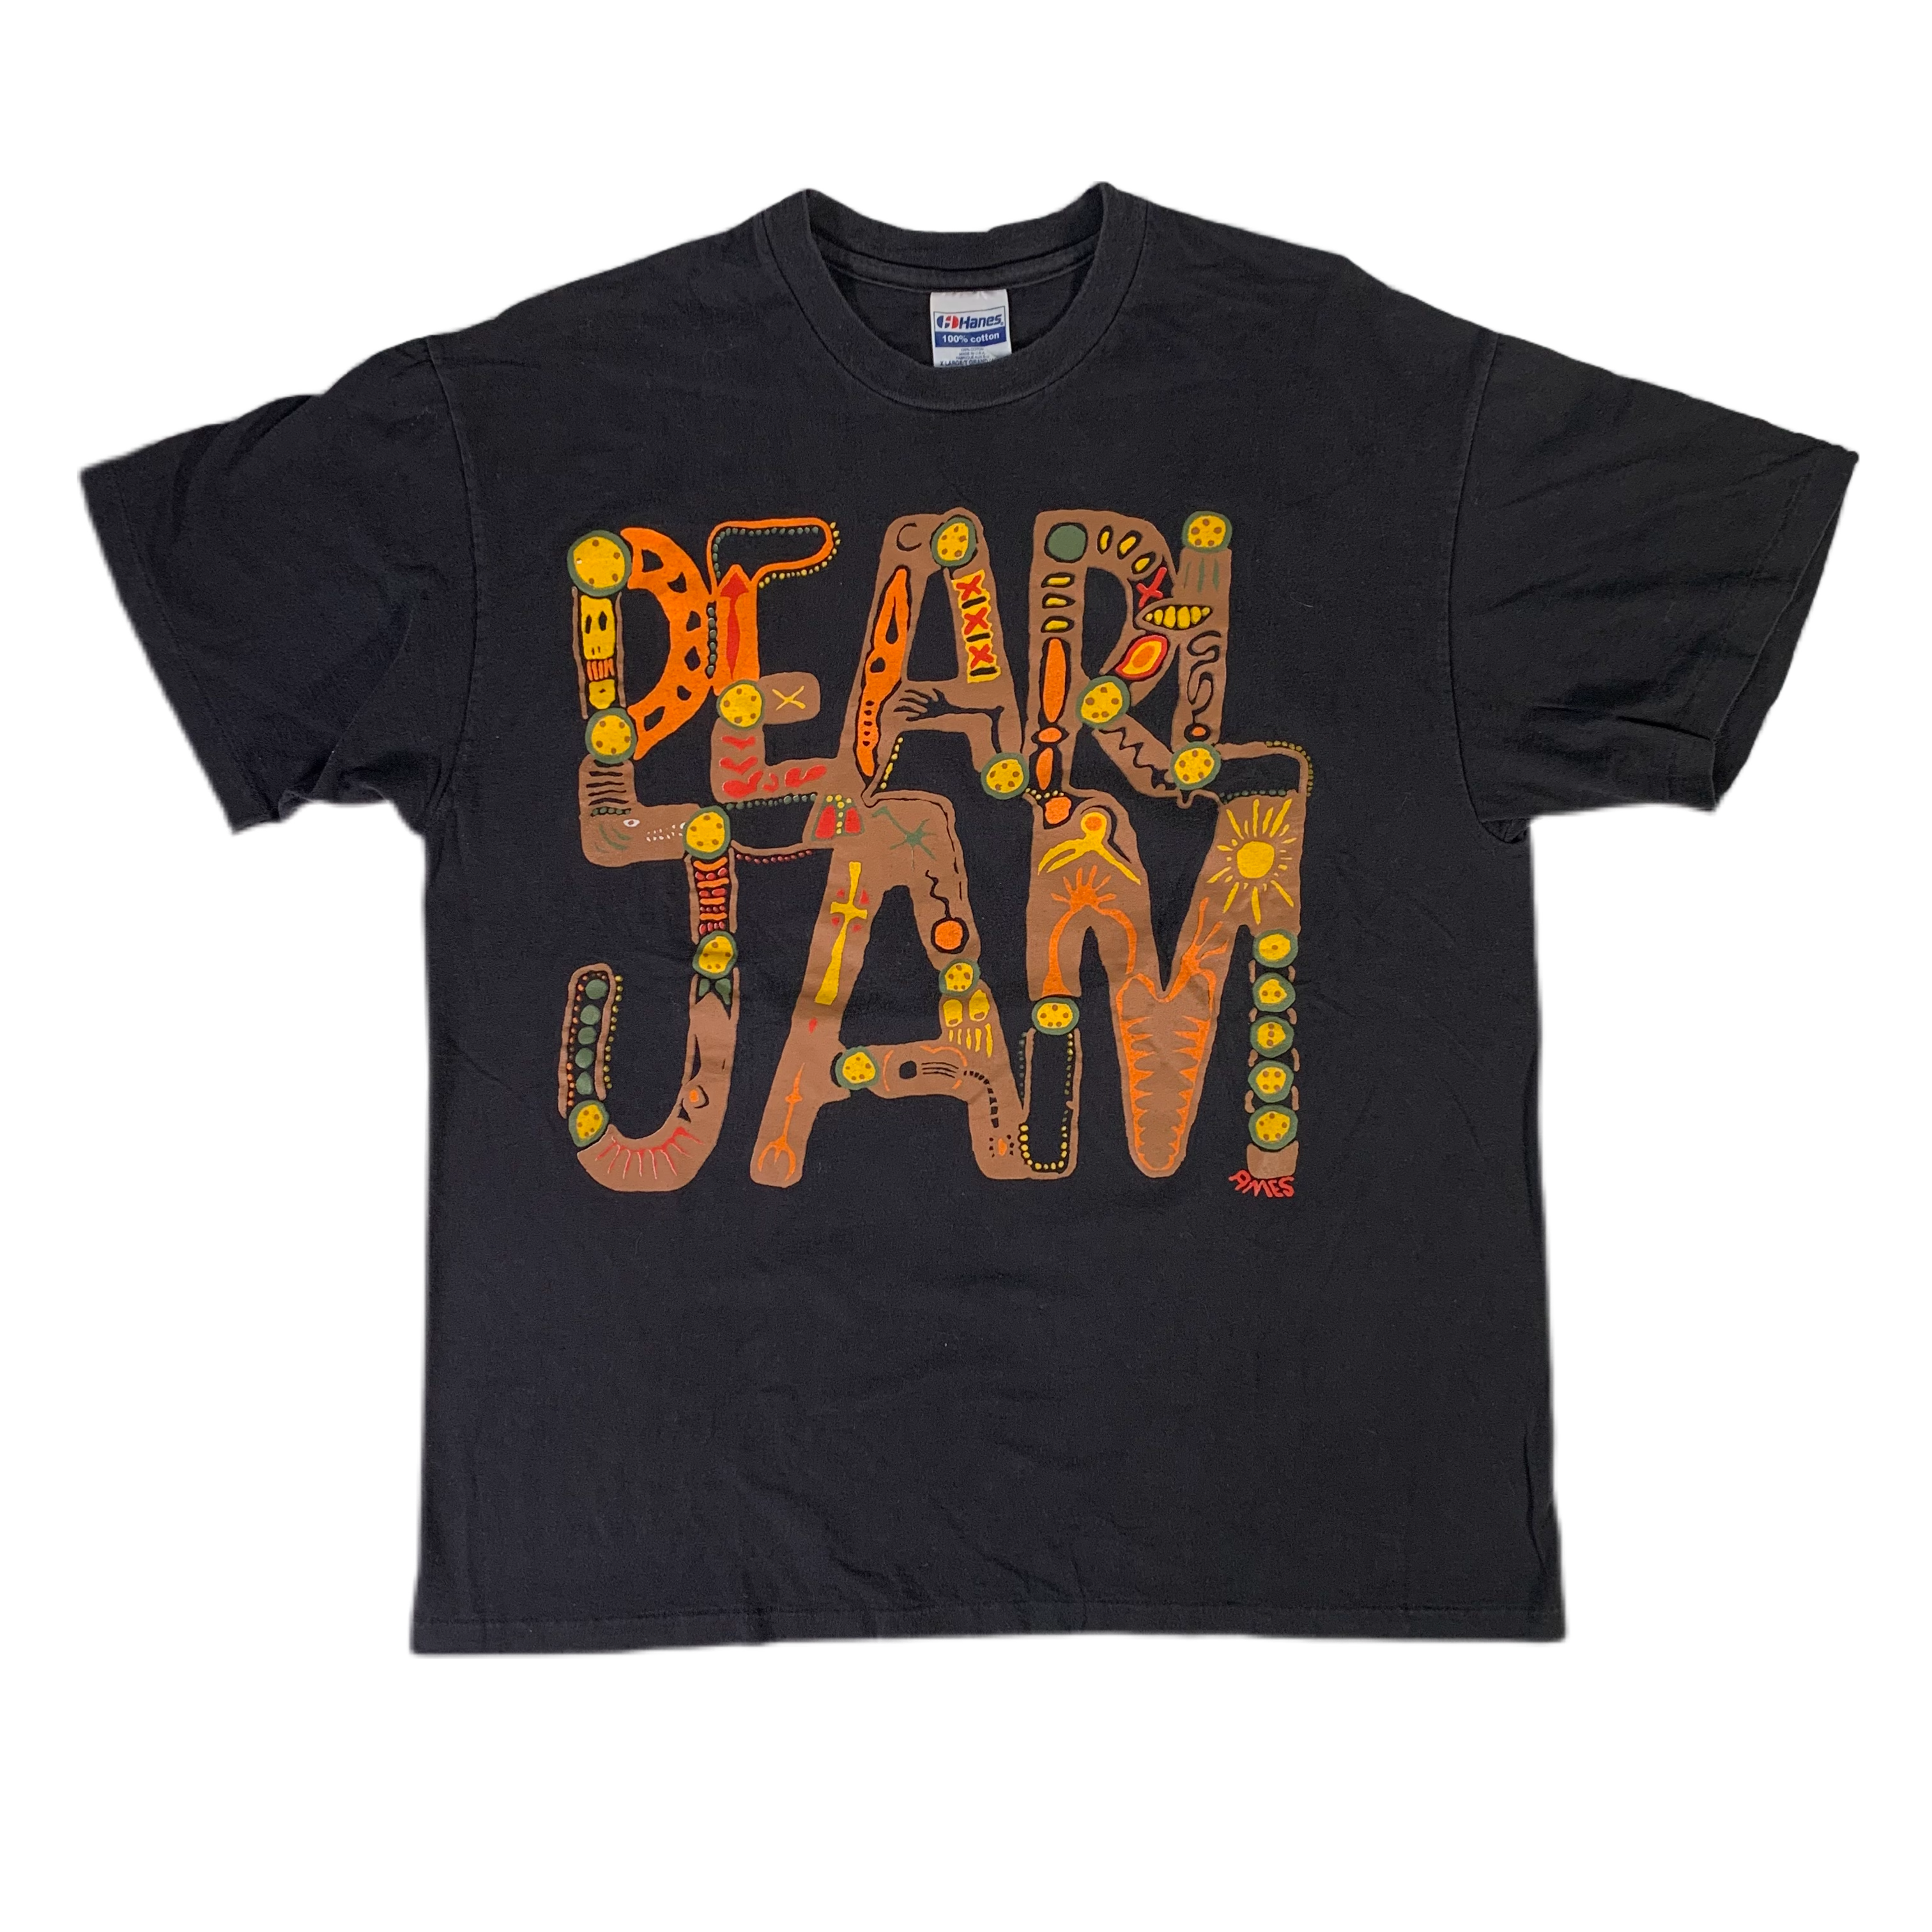 Vintage Pearl Jam Music for Rhinos T-shirt 90s Eddie Vedder Rock Band Tour  – For All To Envy